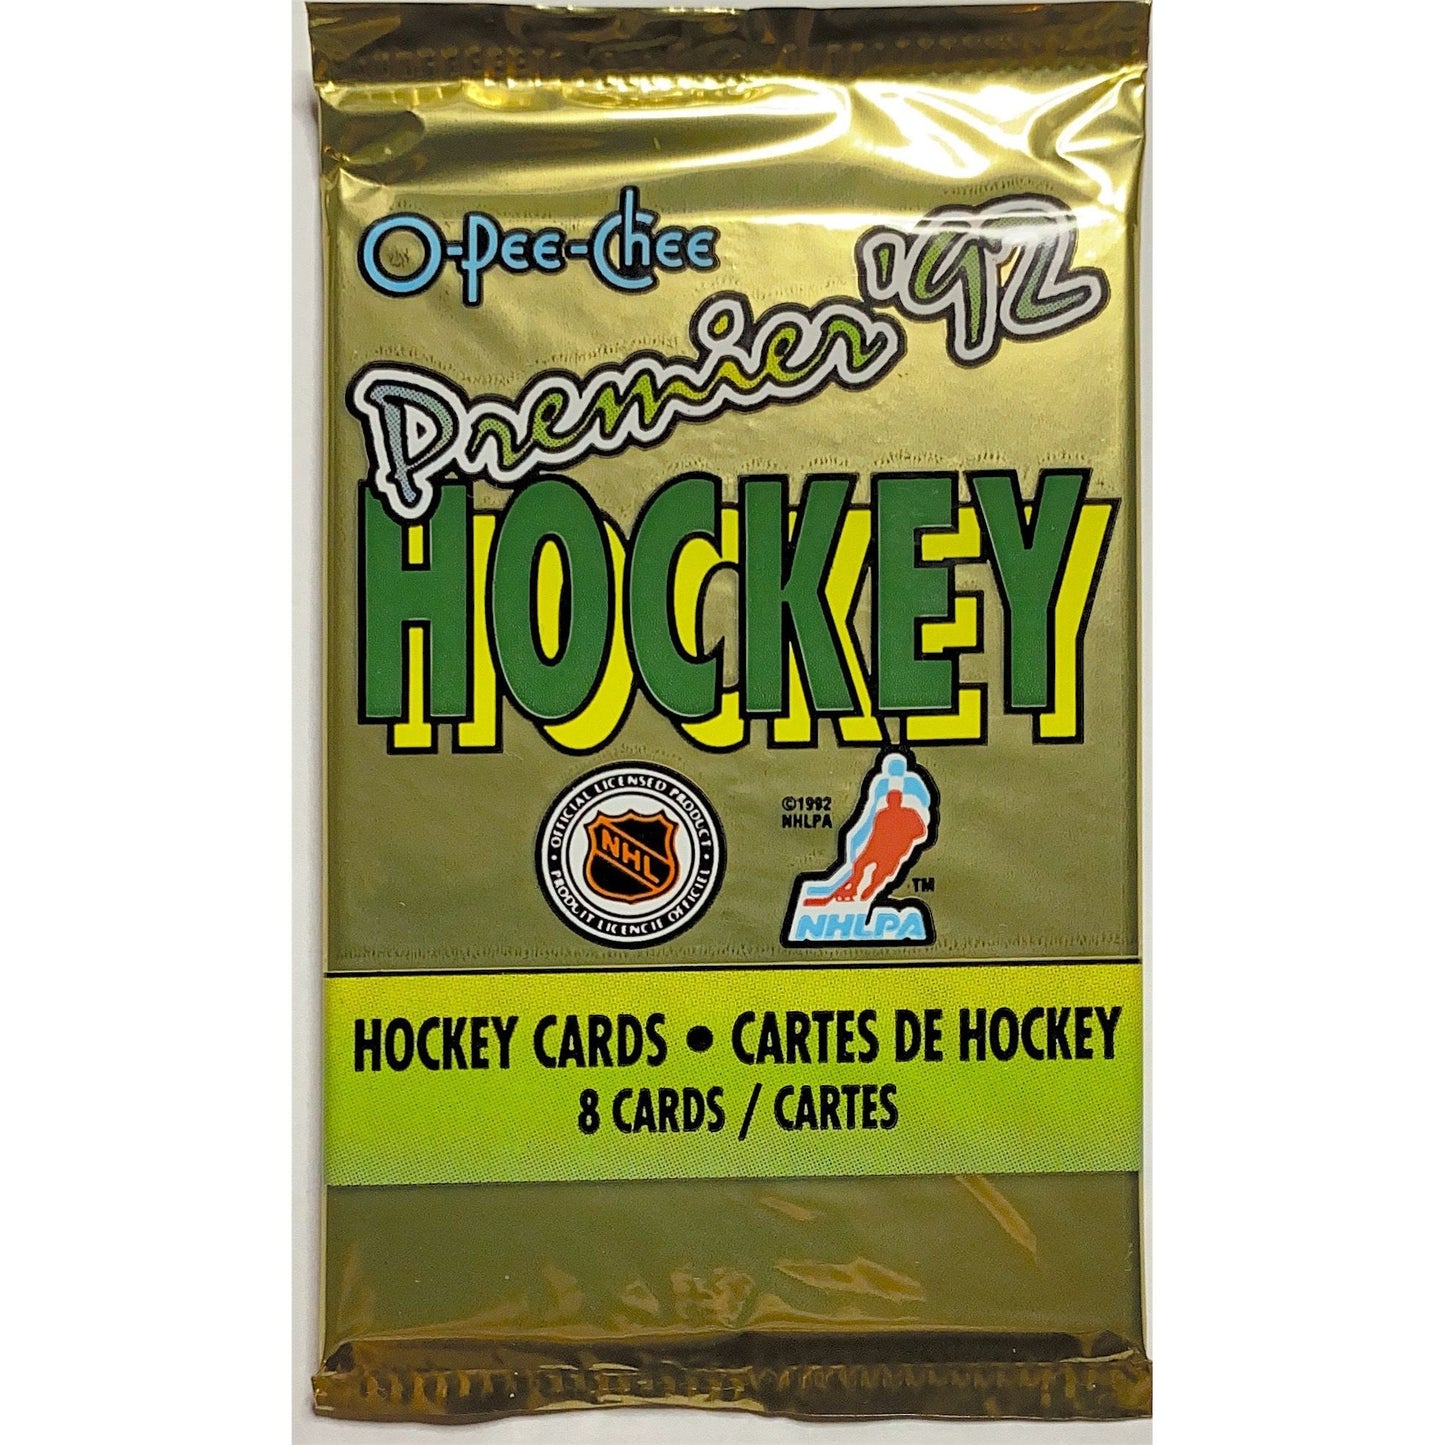  1992 O-Pee-Chee Premier Hockey Pack  Local Legends Cards & Collectibles